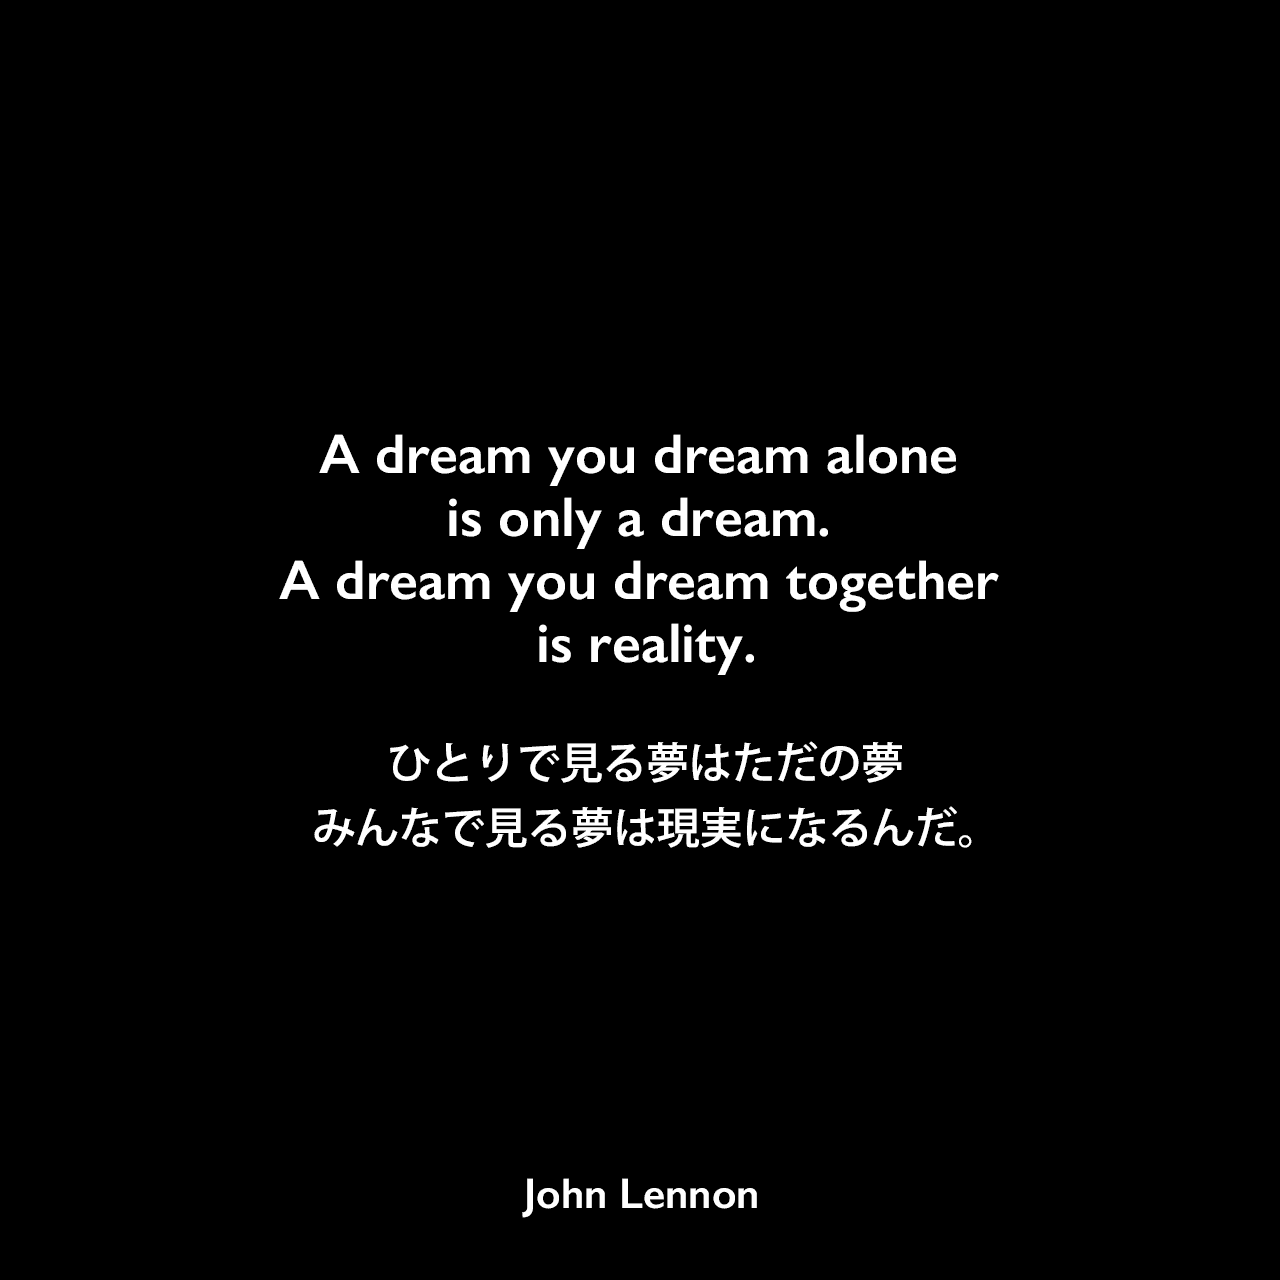 A dream you dream alone is only a dream. A dream you dream together is reality.ひとりで見る夢はただの夢、みんなで見る夢は現実になるんだ。John Lennon